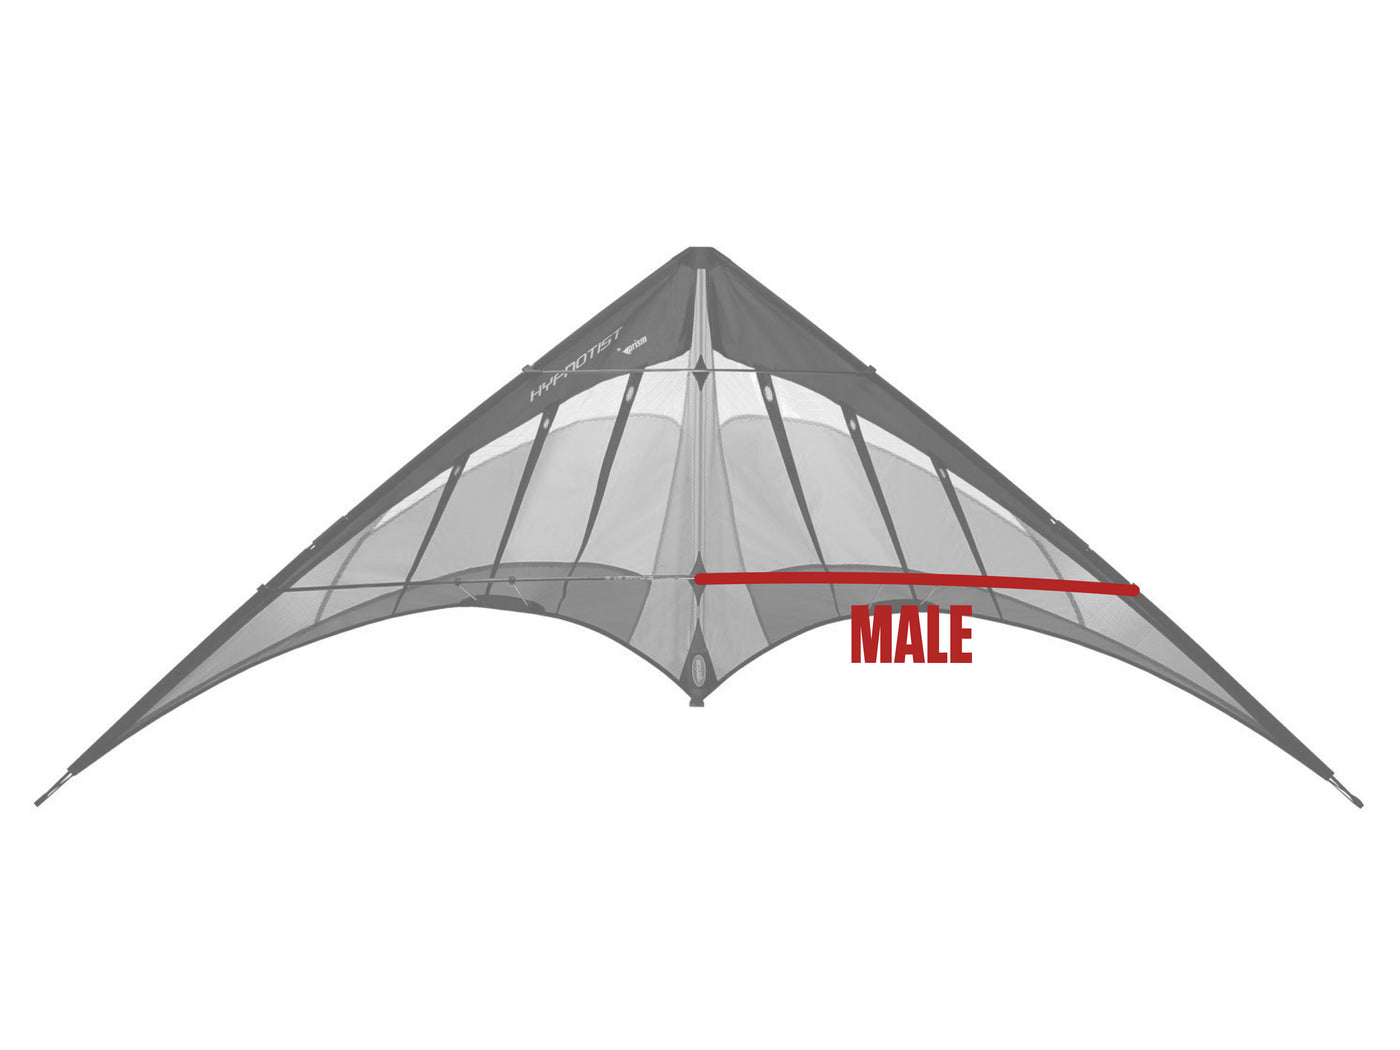 Diagram showing location of the Hypnotist Lower Spreader Male on the kite.